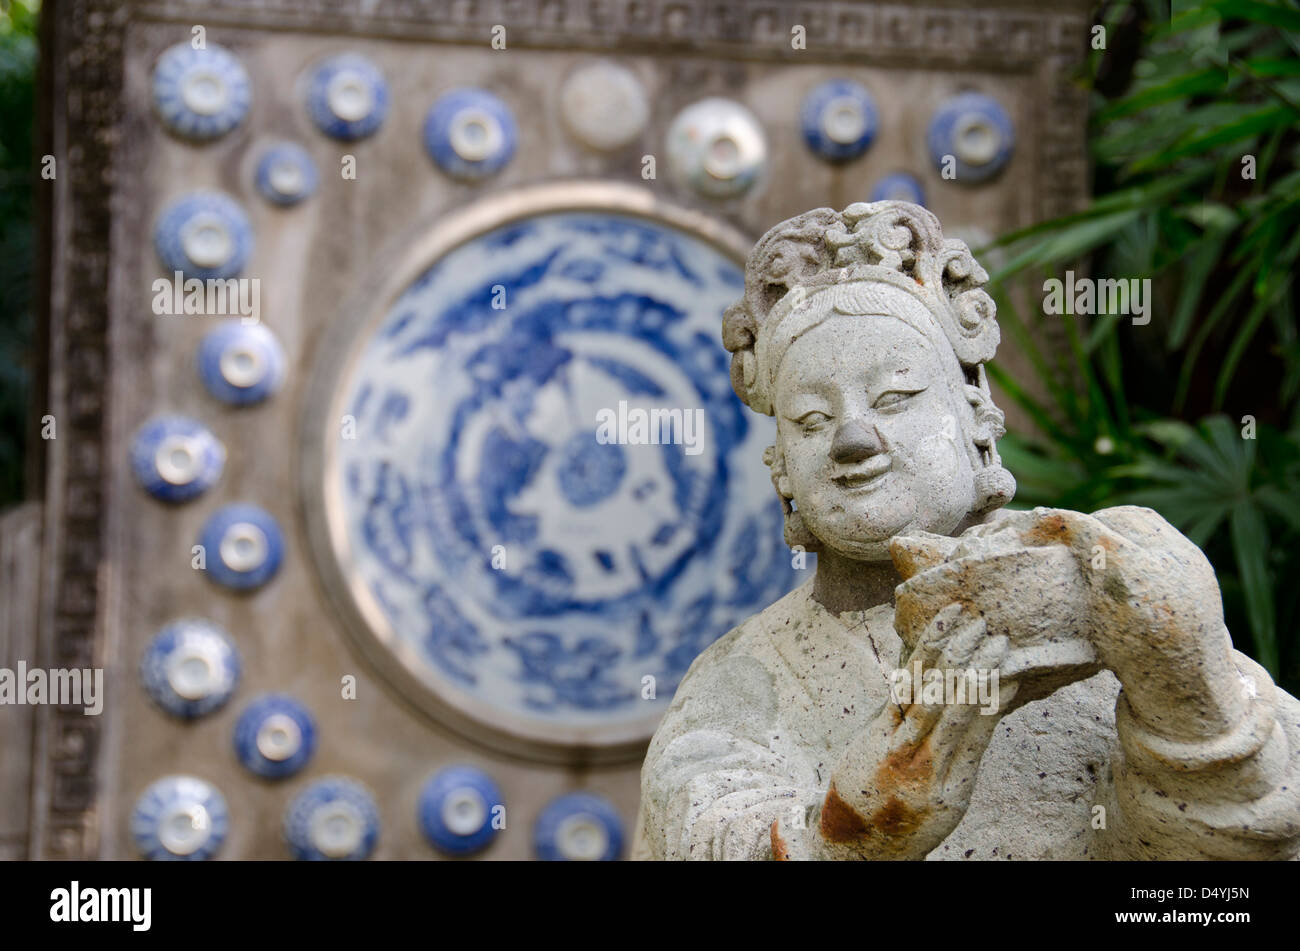 Thailand, Bangkok. The Prasart Museum. Asian garden statue in front of traditional blue and white Chinese pottery. Stock Photo